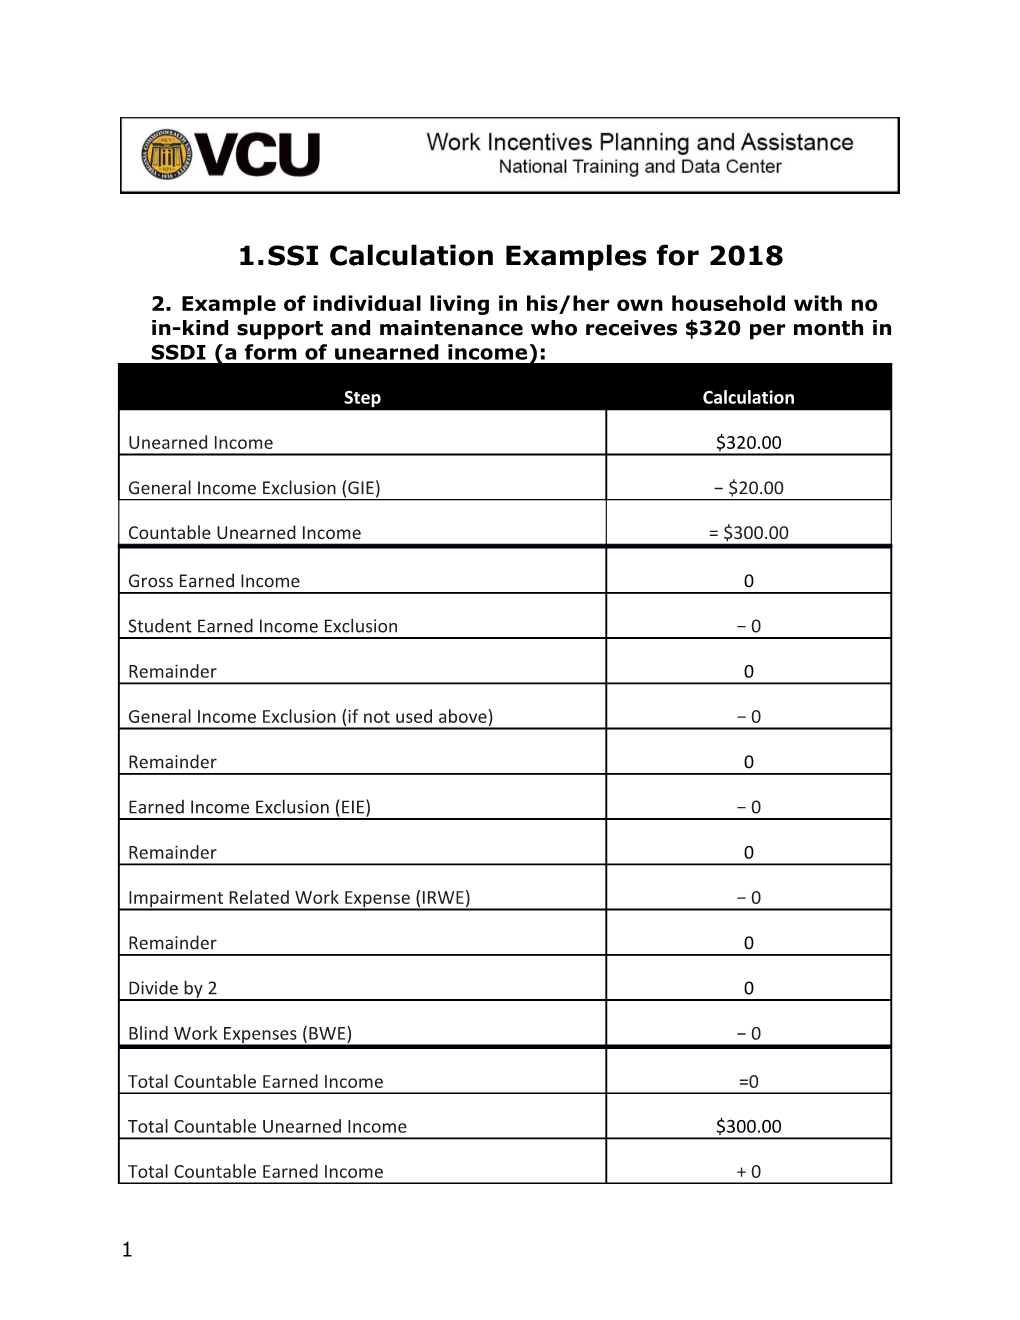 SSI Calculation Examples for 2018